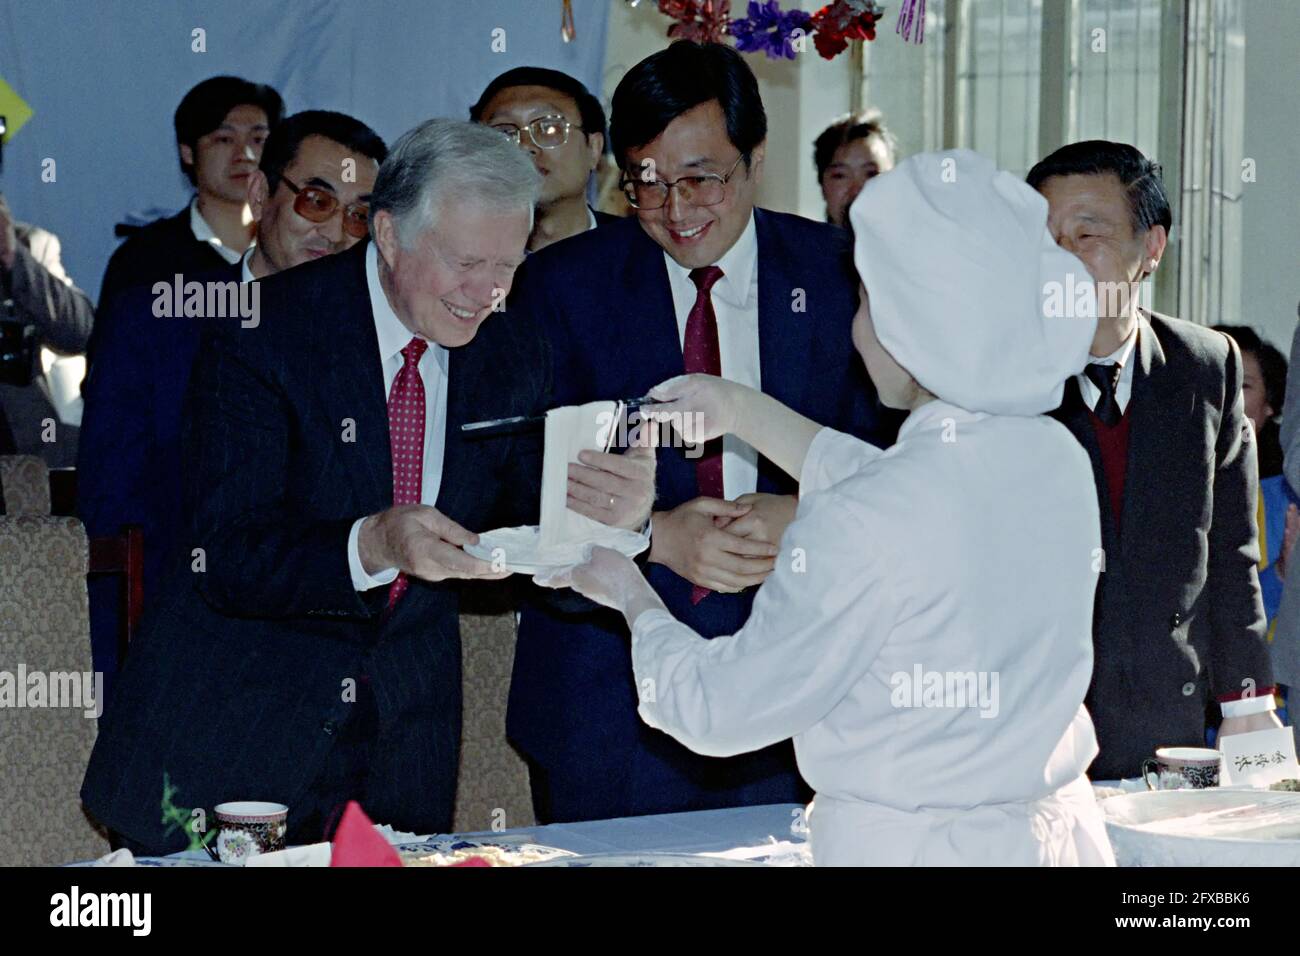 Former U.S. President Jimmy Carter smiles as he is show homemade noodles during a visit to a school for the deaf April 14, 1991 in Beijing, China. The former president funded programs to train special education instructors in China in 1987 and was checking on the progress of his program. Stock Photo